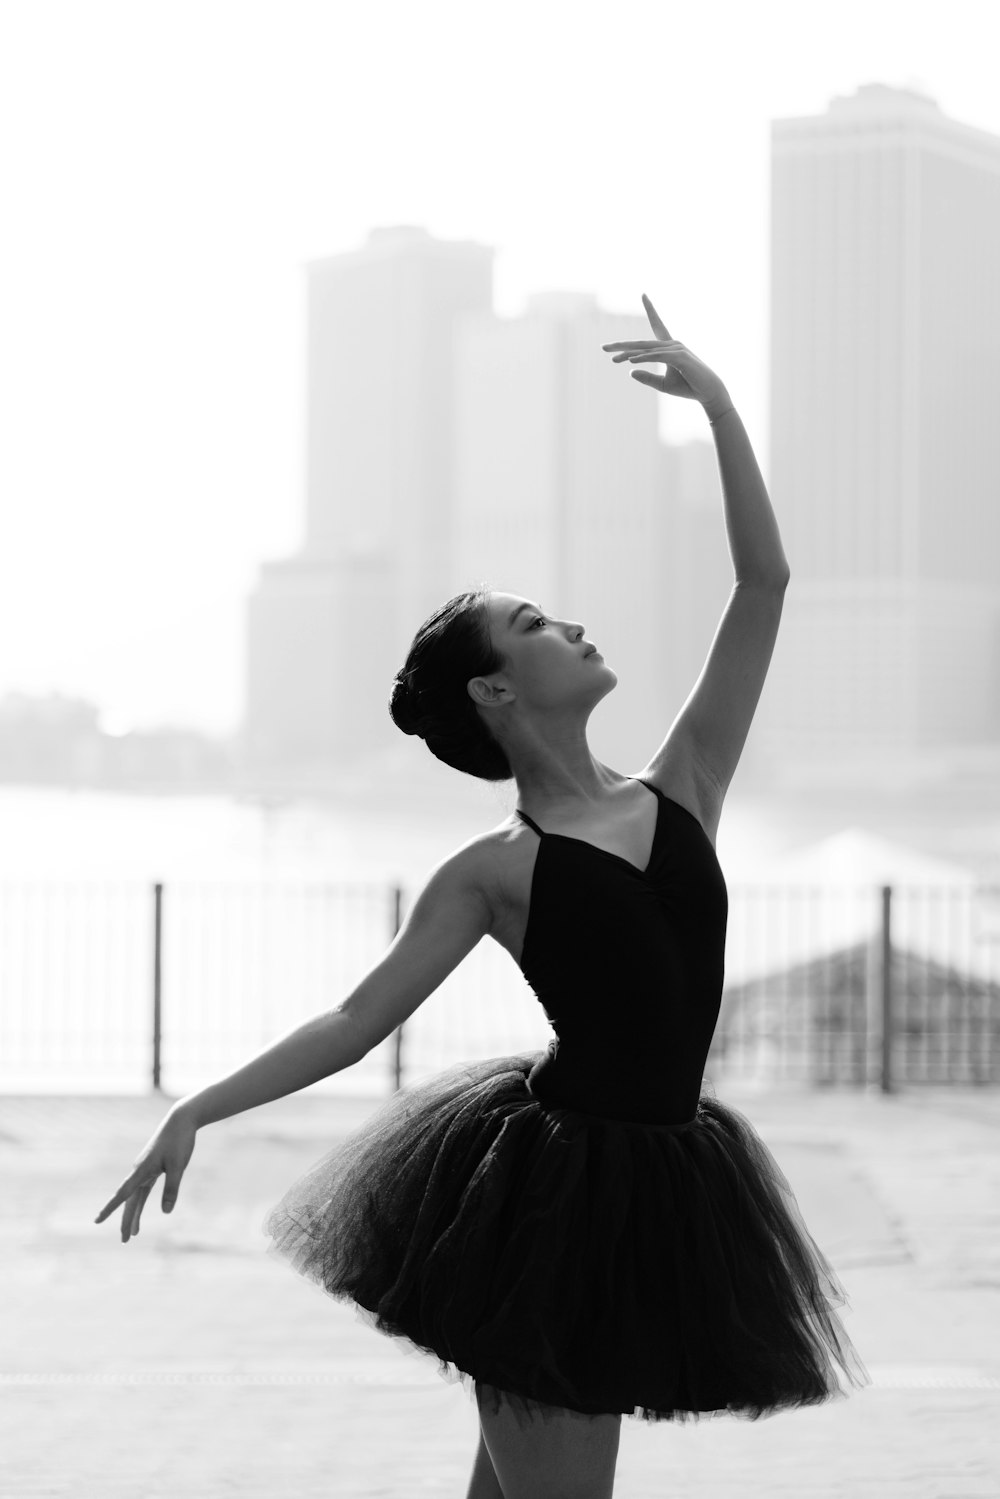 350+ Ballerina Pictures | Download Free Images & Stock Photos on Unsplash